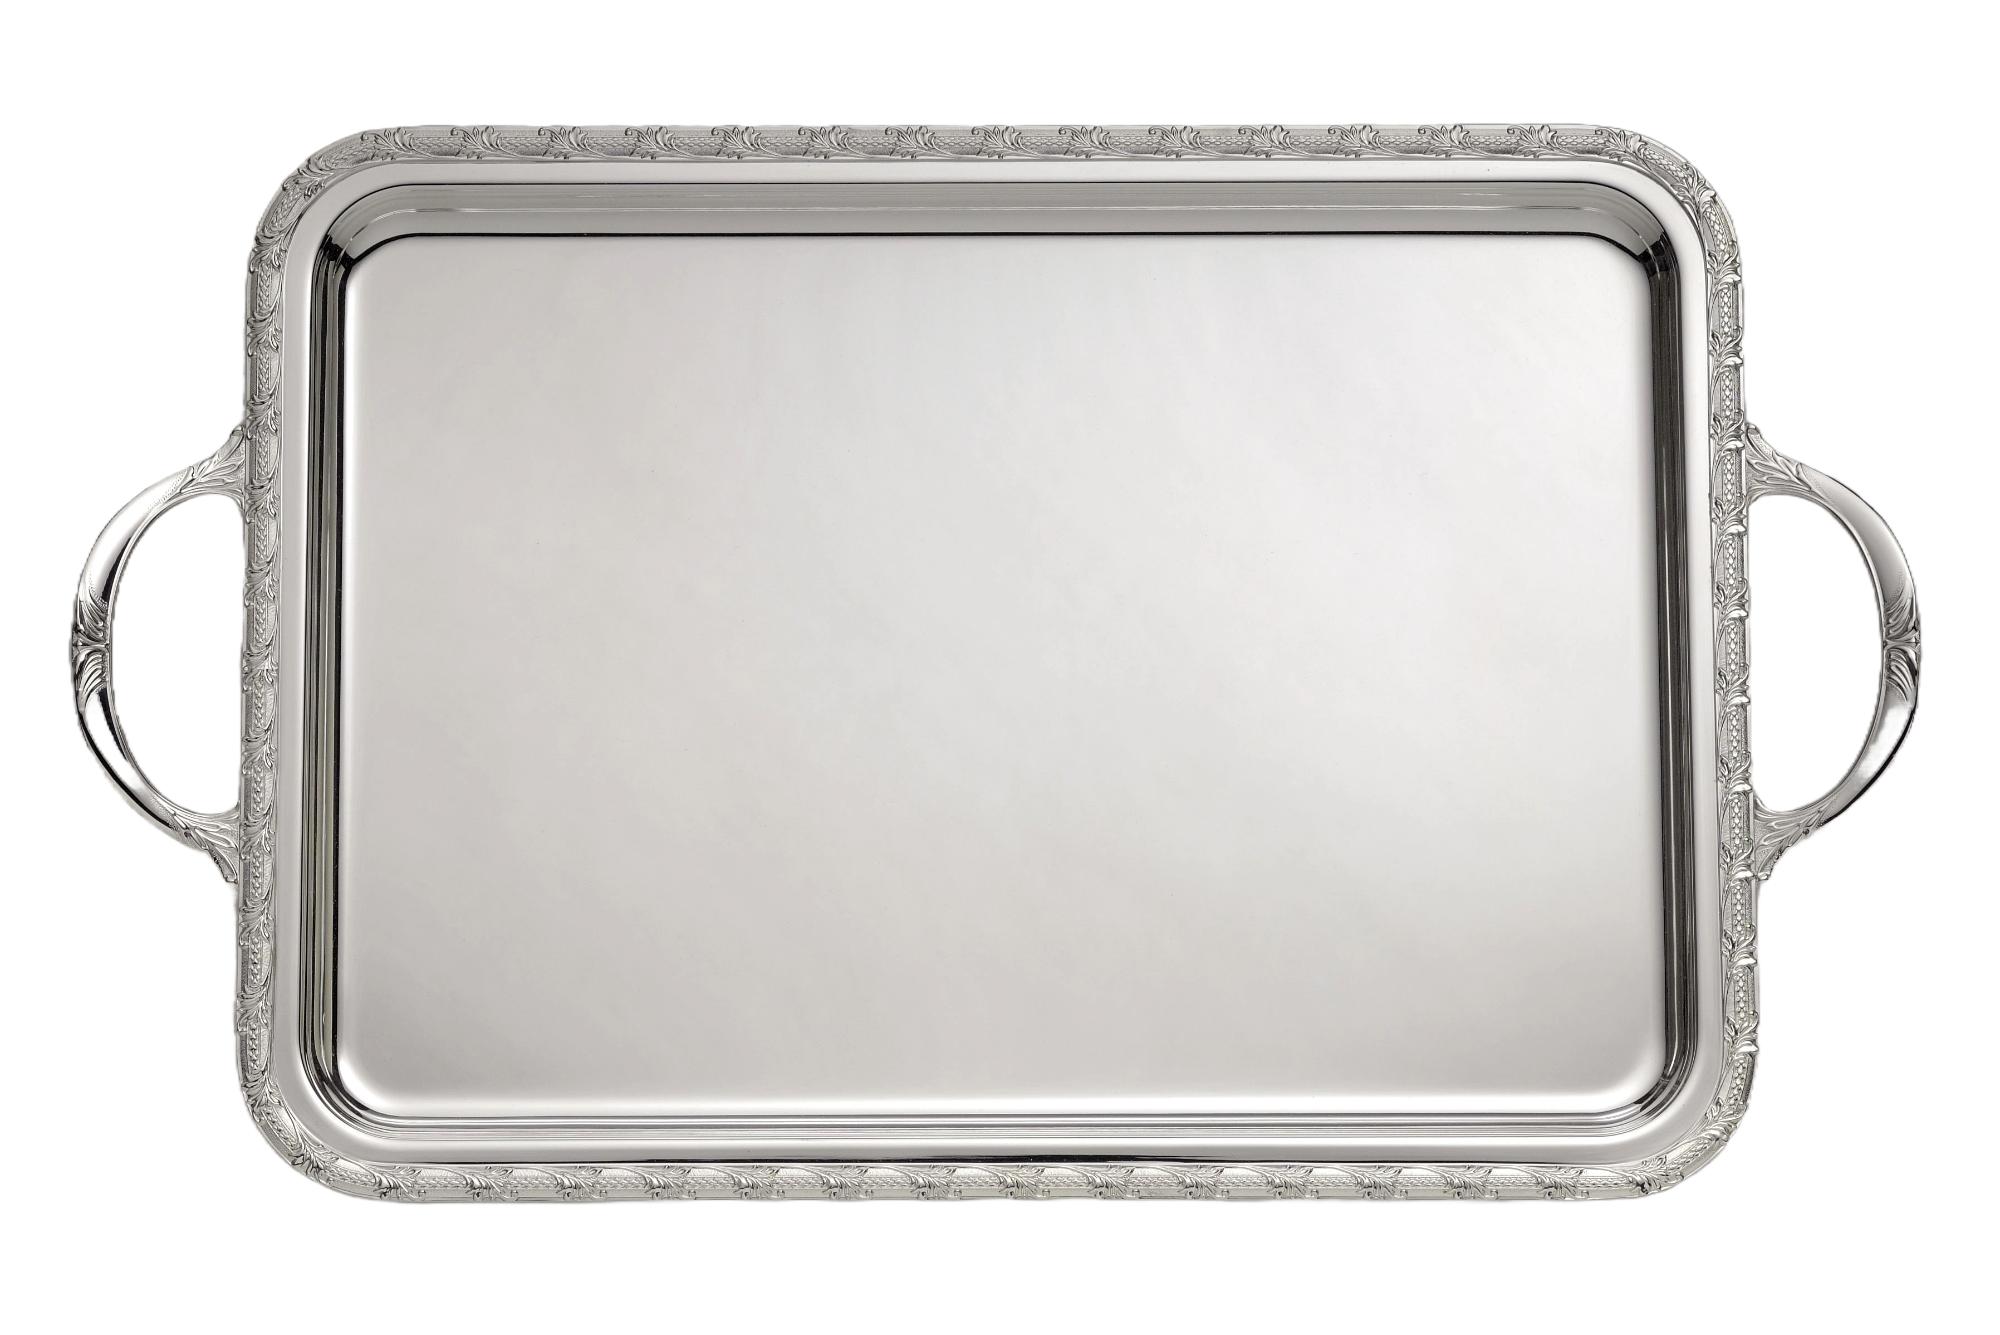 Royal Silver Serving Tray with Handles